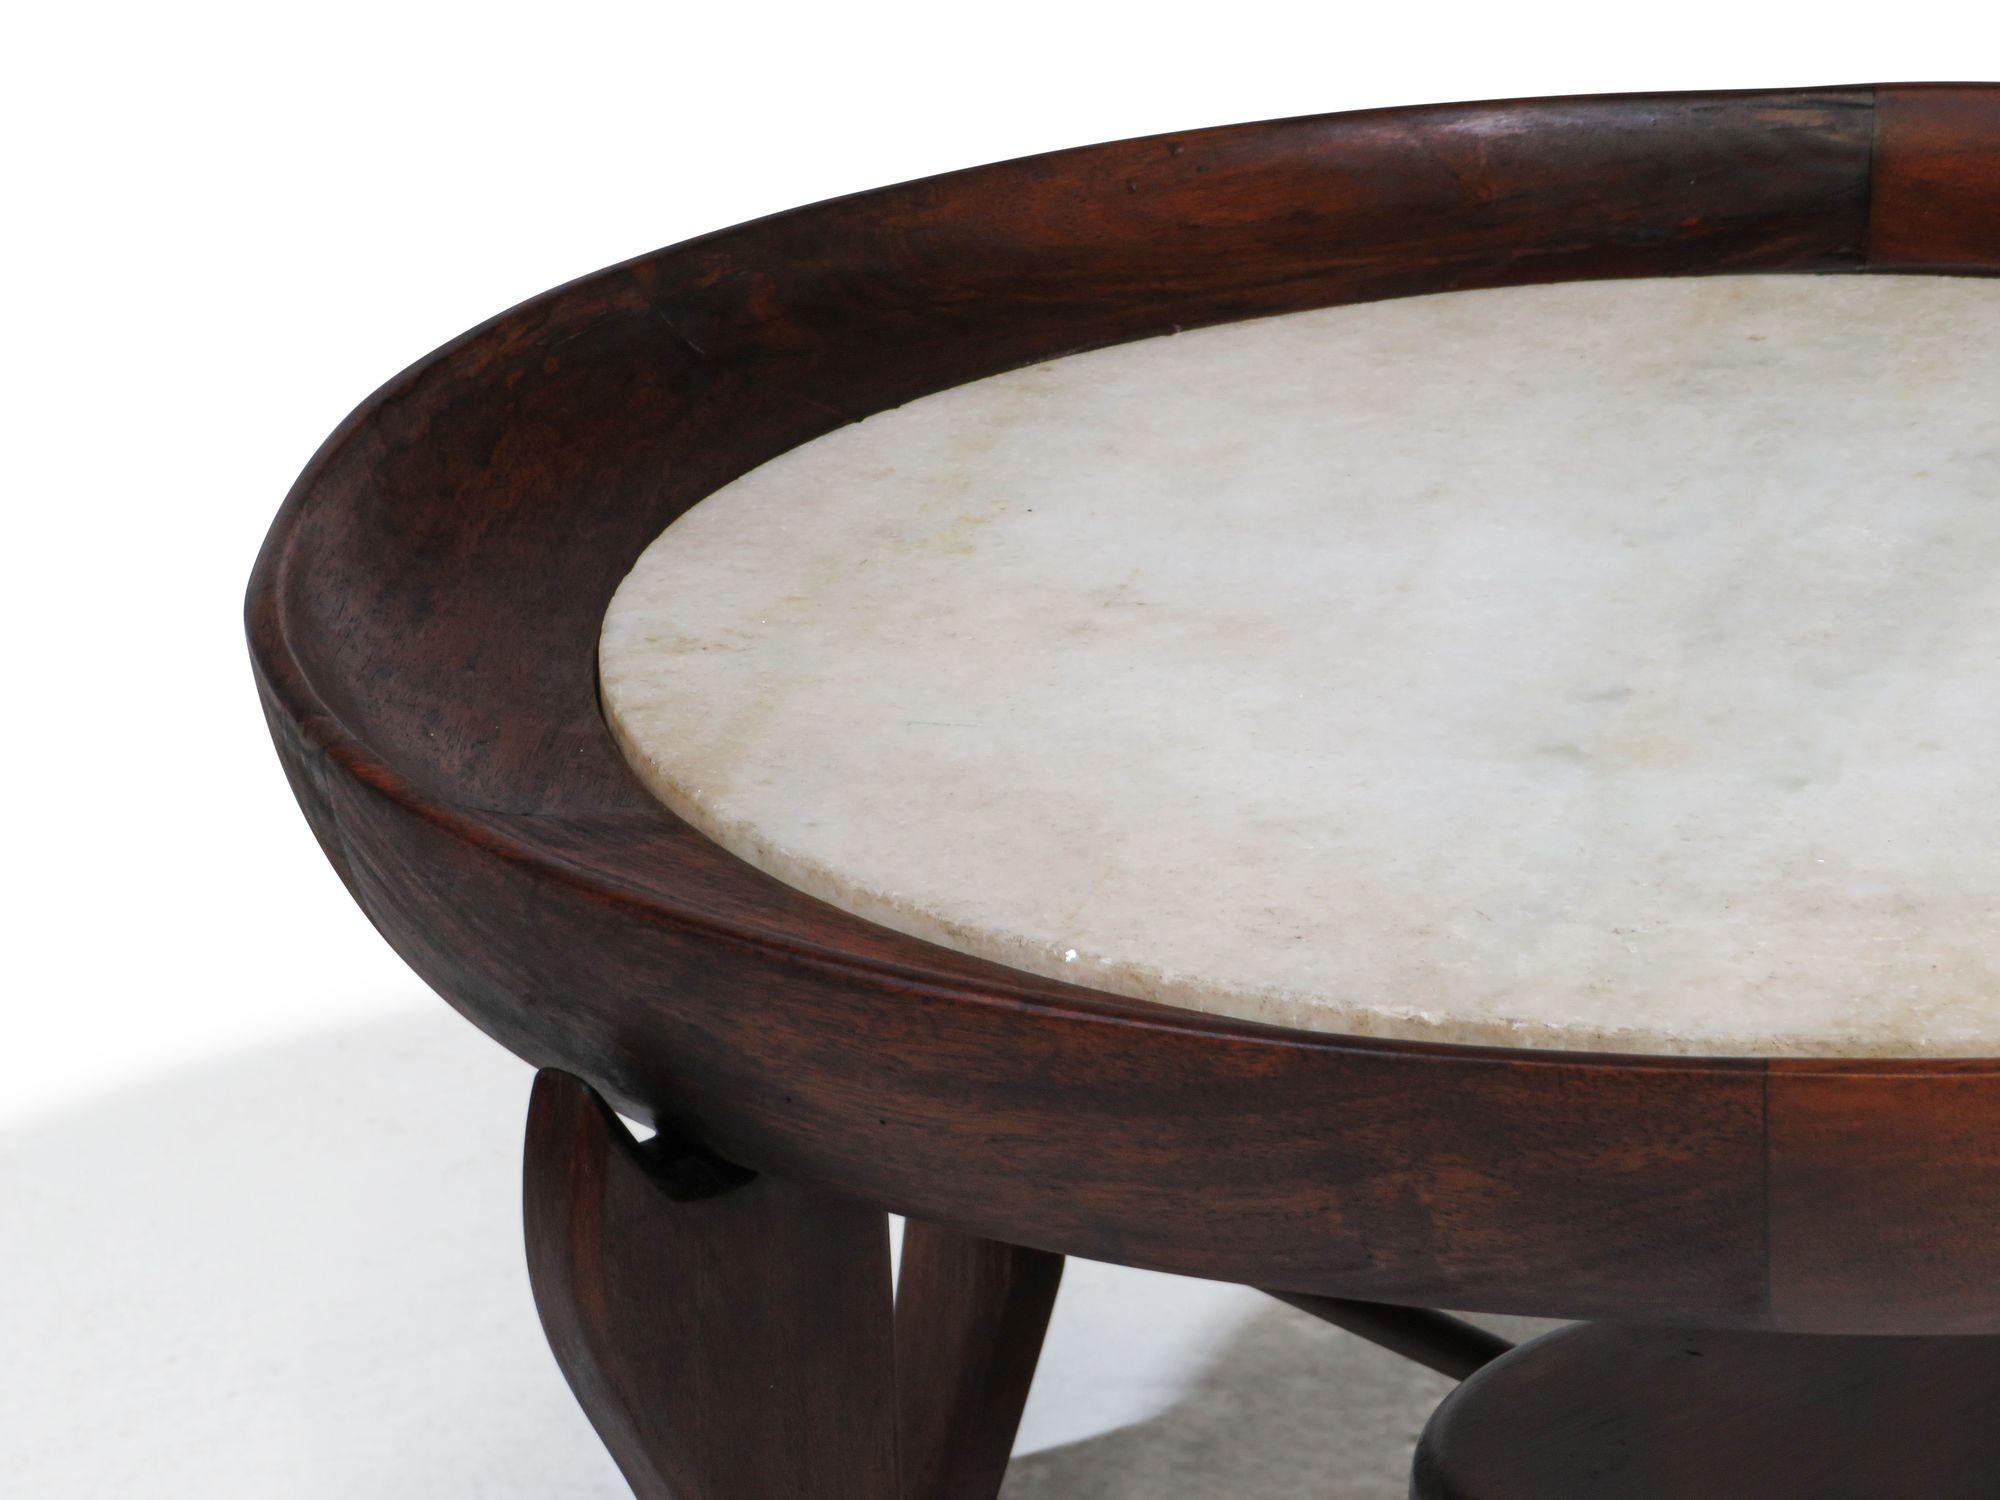 Giuseppe Scapinelli Maracana Coffee Table In Distressed Condition For Sale In Oakland, CA